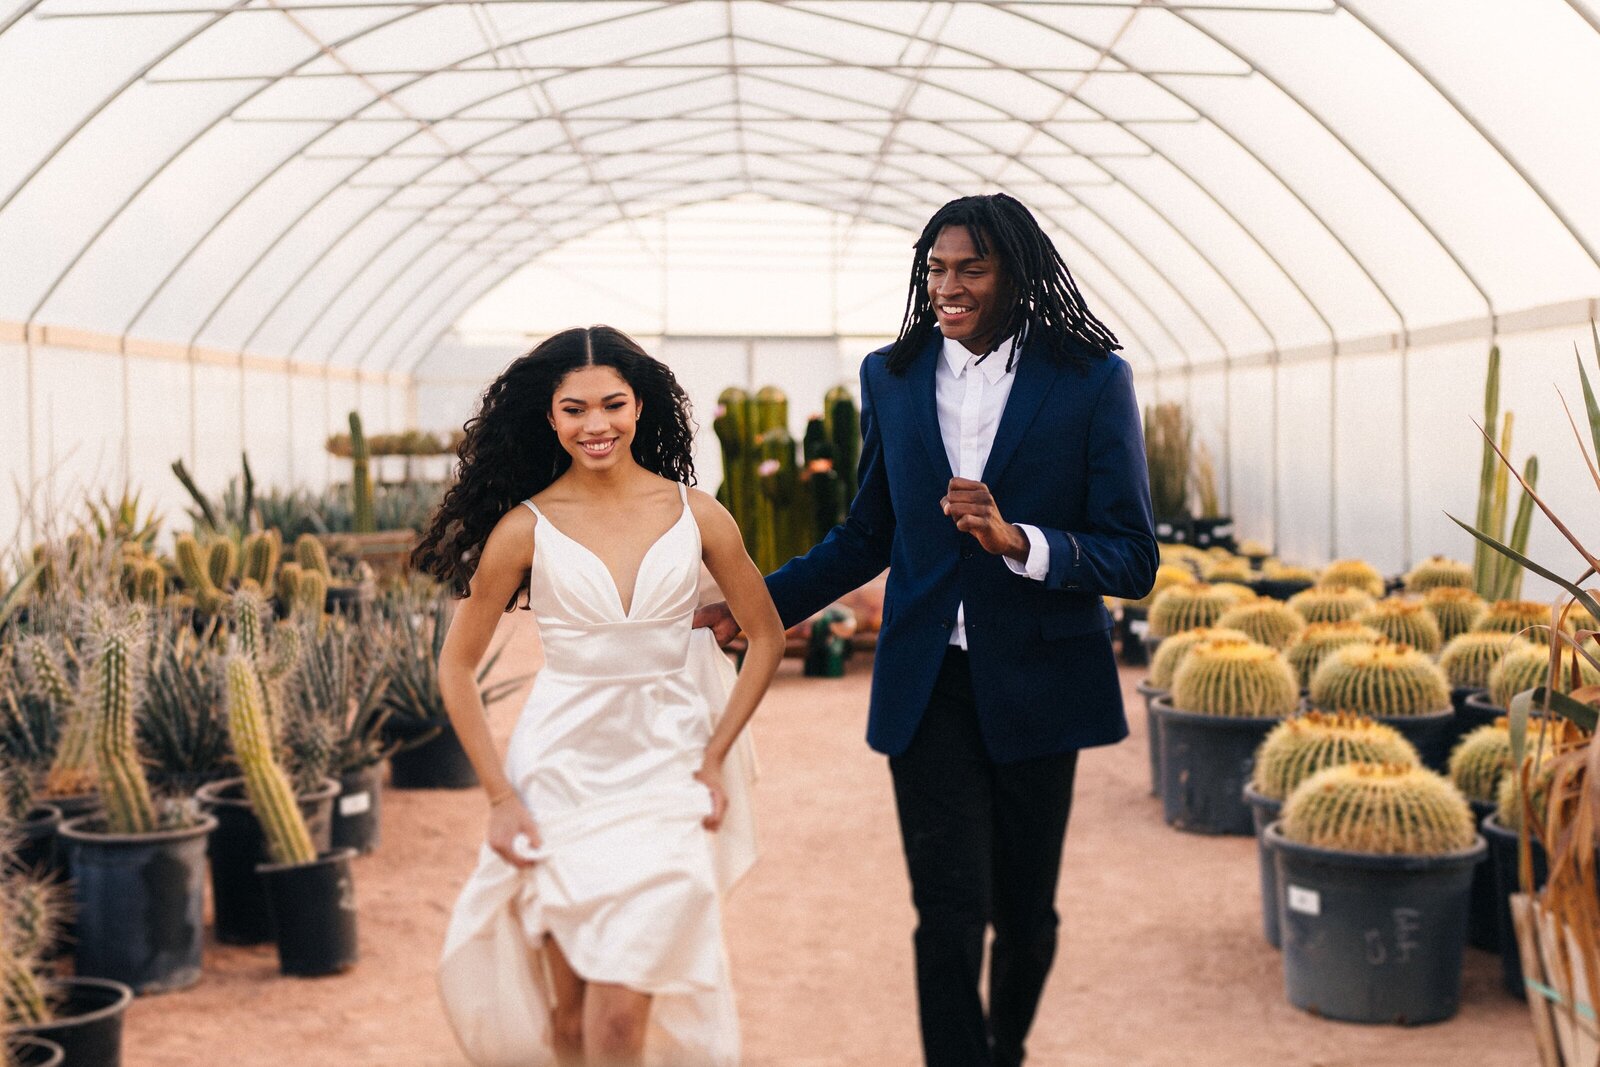 A stunning newlywed couple taking a leisurely stroll around Cactus Joe's Geodomes.